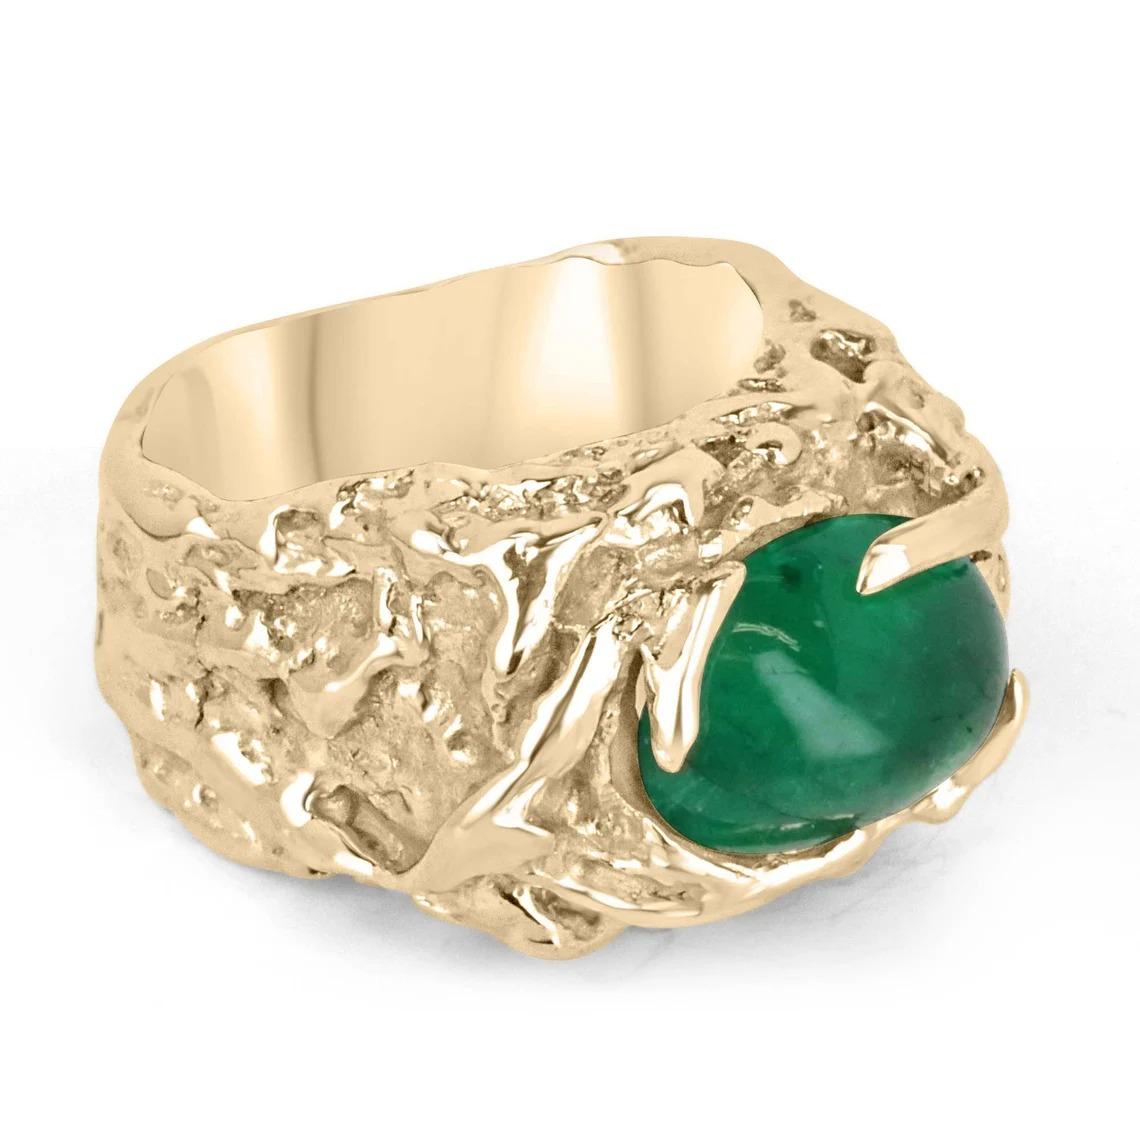 Introducing a stunning solitaire men's ring featuring a mesmerizing cabochon cut emerald of oval shape. The emerald is uniquely set in an east-to-west orientation, showcasing its vivid dark green color with exceptional luster and captivating